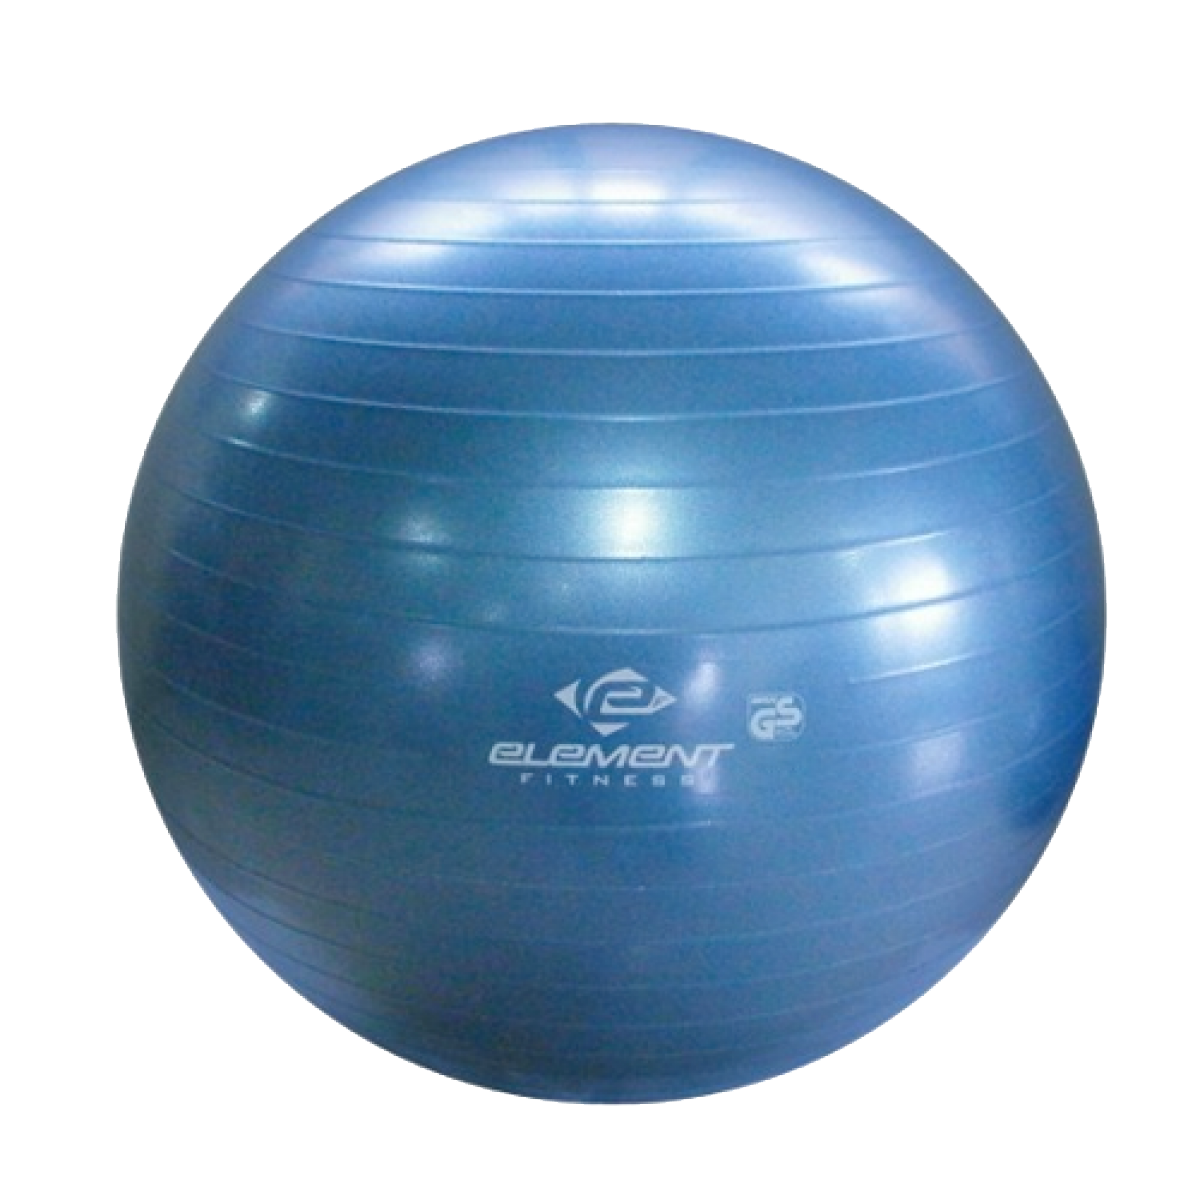 Gym Ball Png Image Png Image - Gym Ball, Transparent background PNG HD thumbnail